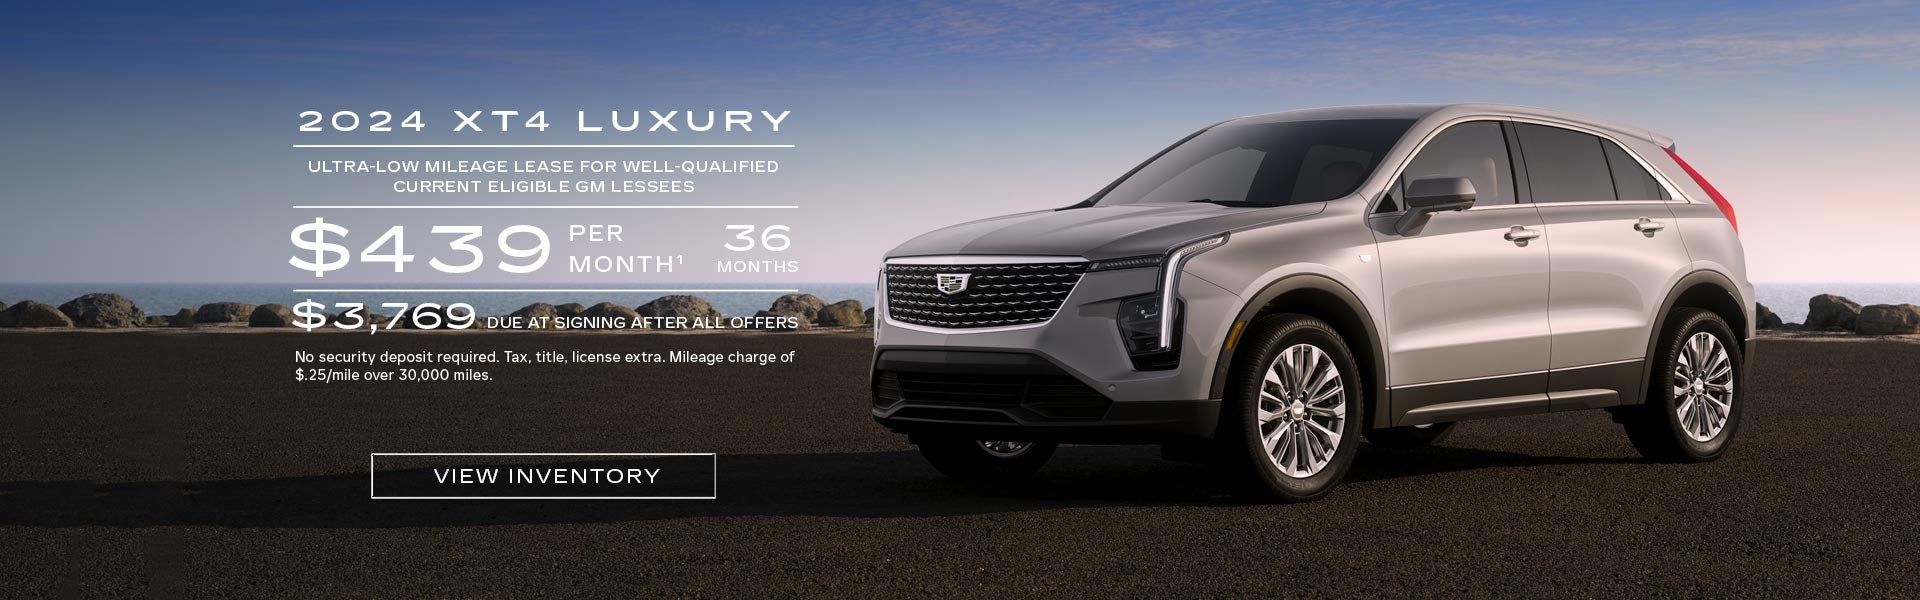 2024 XT4 Luxury Ultra-low mileage lease for well-qualified current eligible GM lessees. $439 per ...